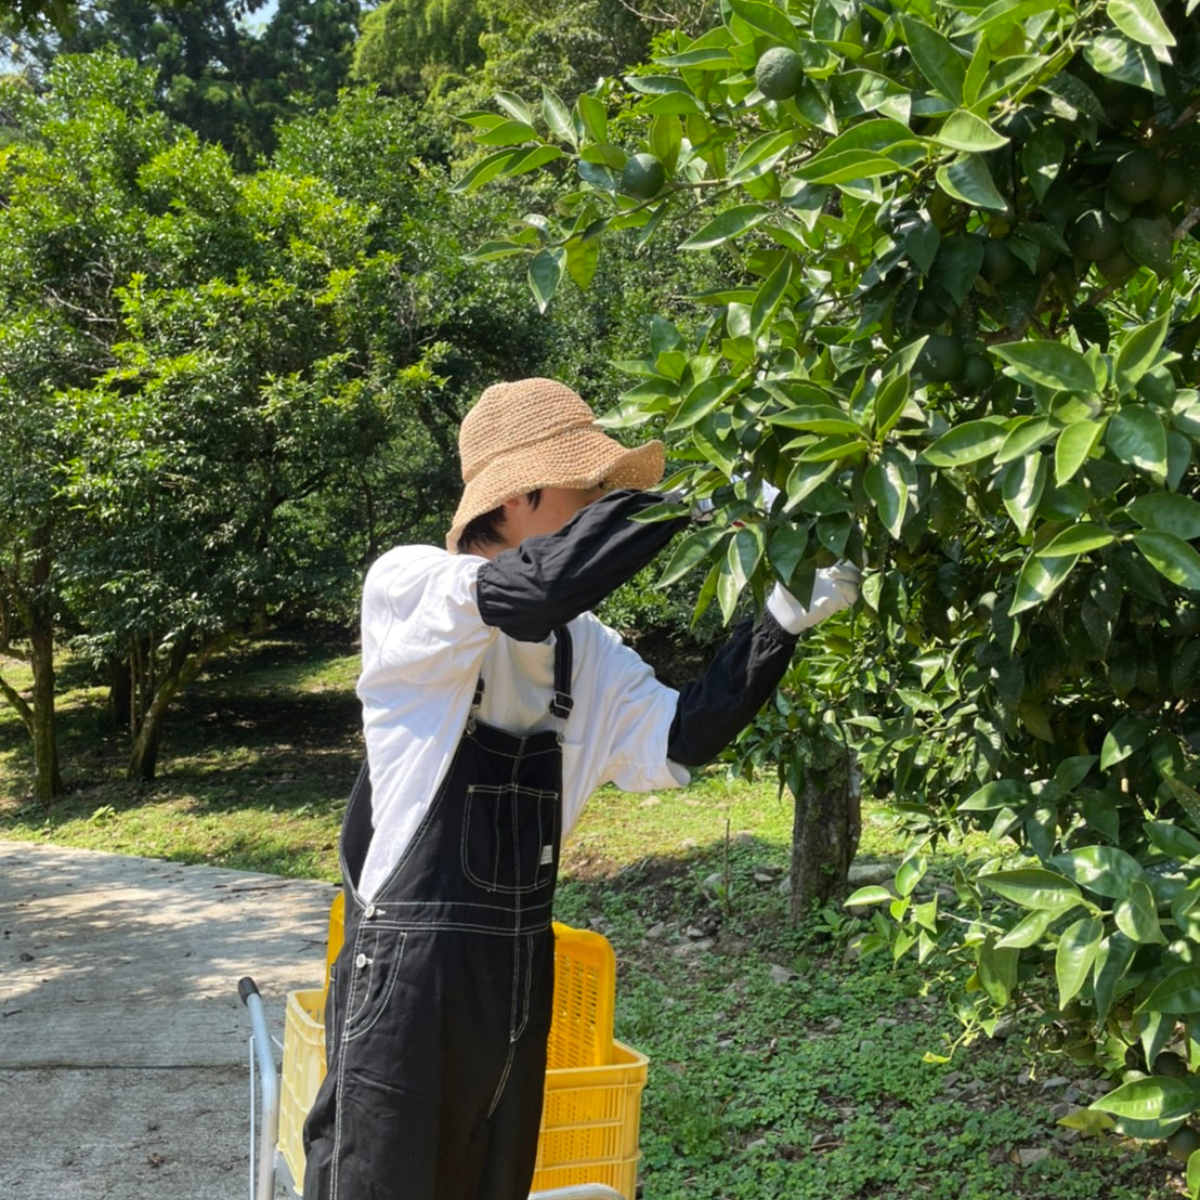 A man picking up a sudachi citrus from trees